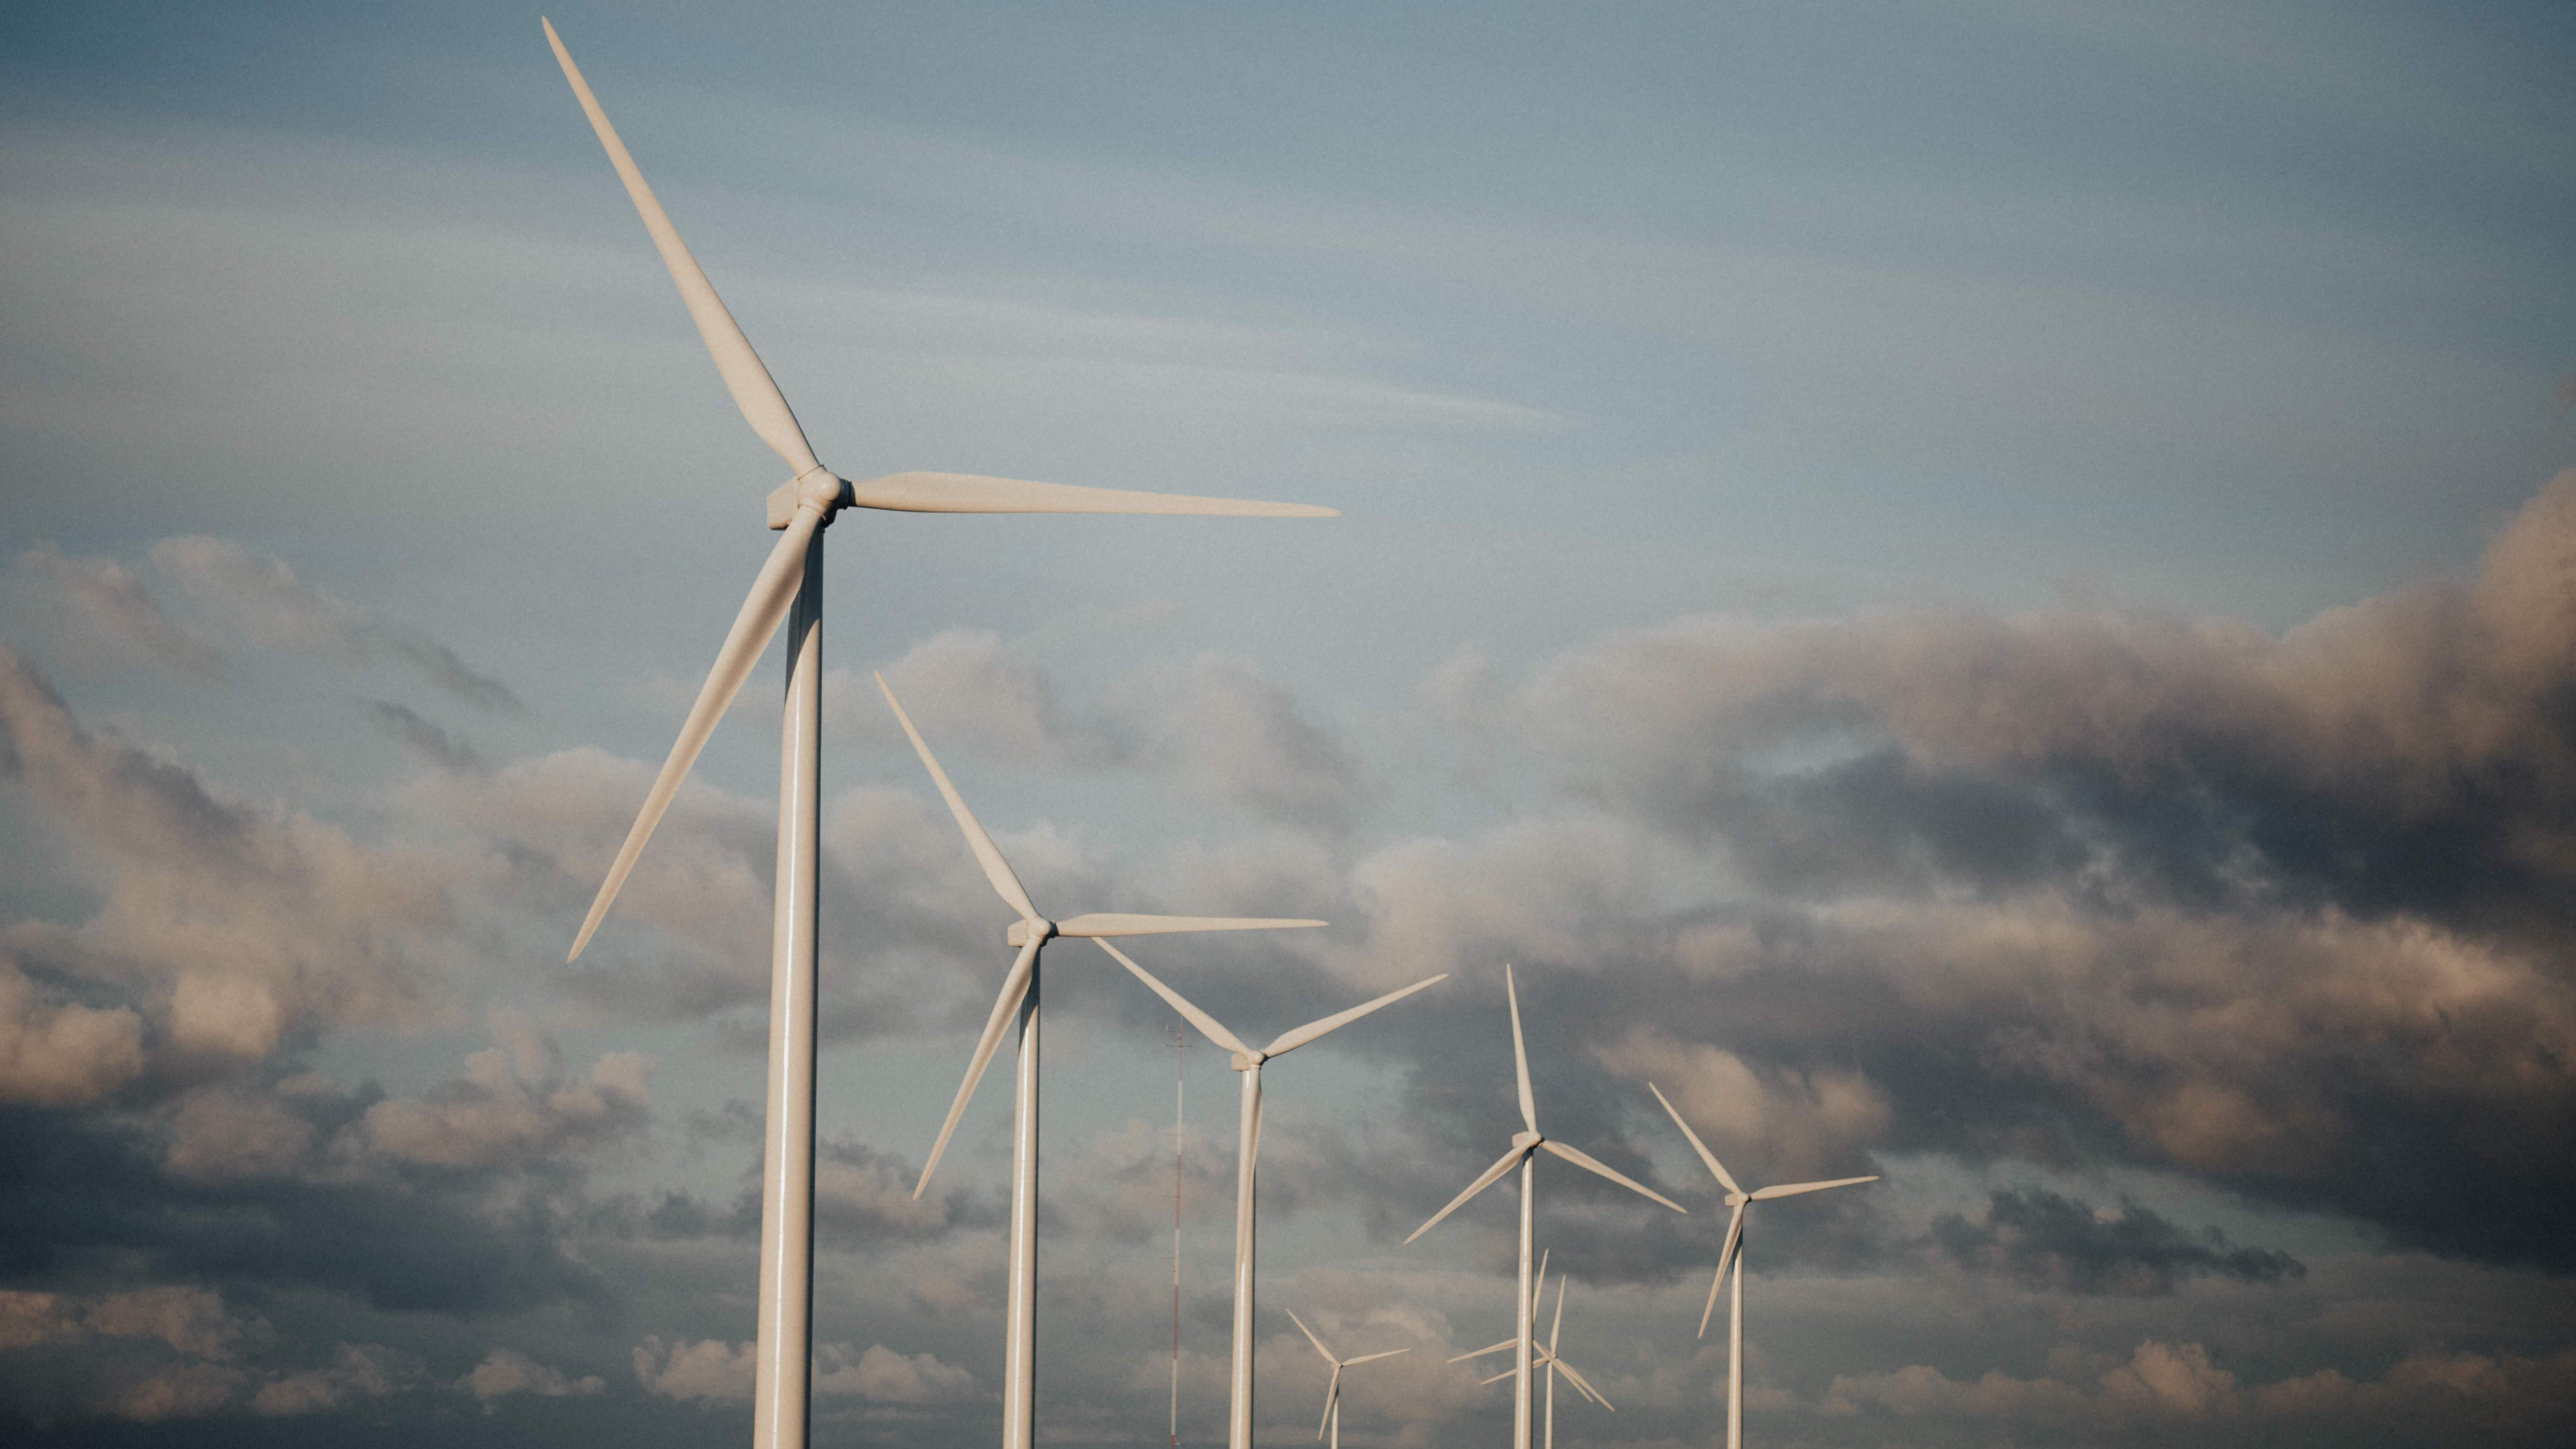 UK offshore wind capacity to double in next 10 years, says RenewableUK